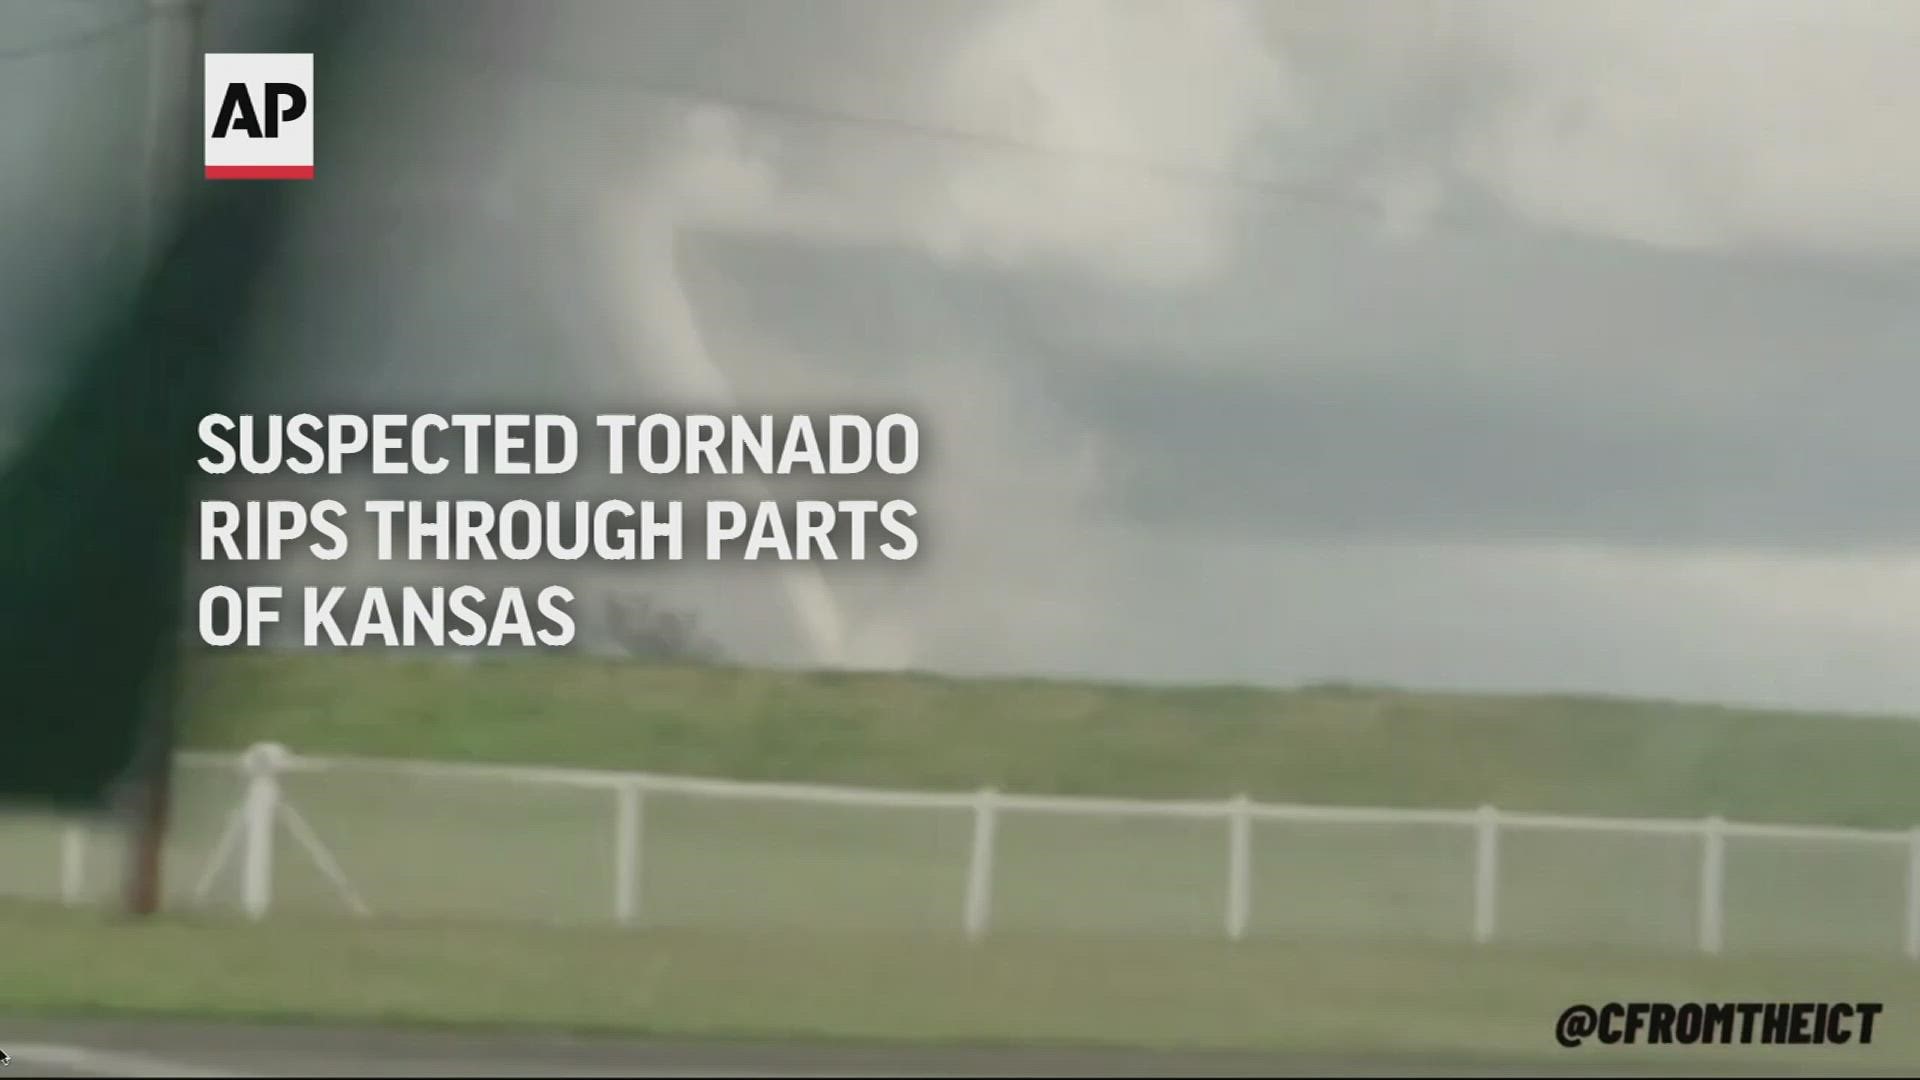 A suspected tornado that barreled through parts of Kansas damaged multiple buildings, injured several people and left more than 6,500 people without power.